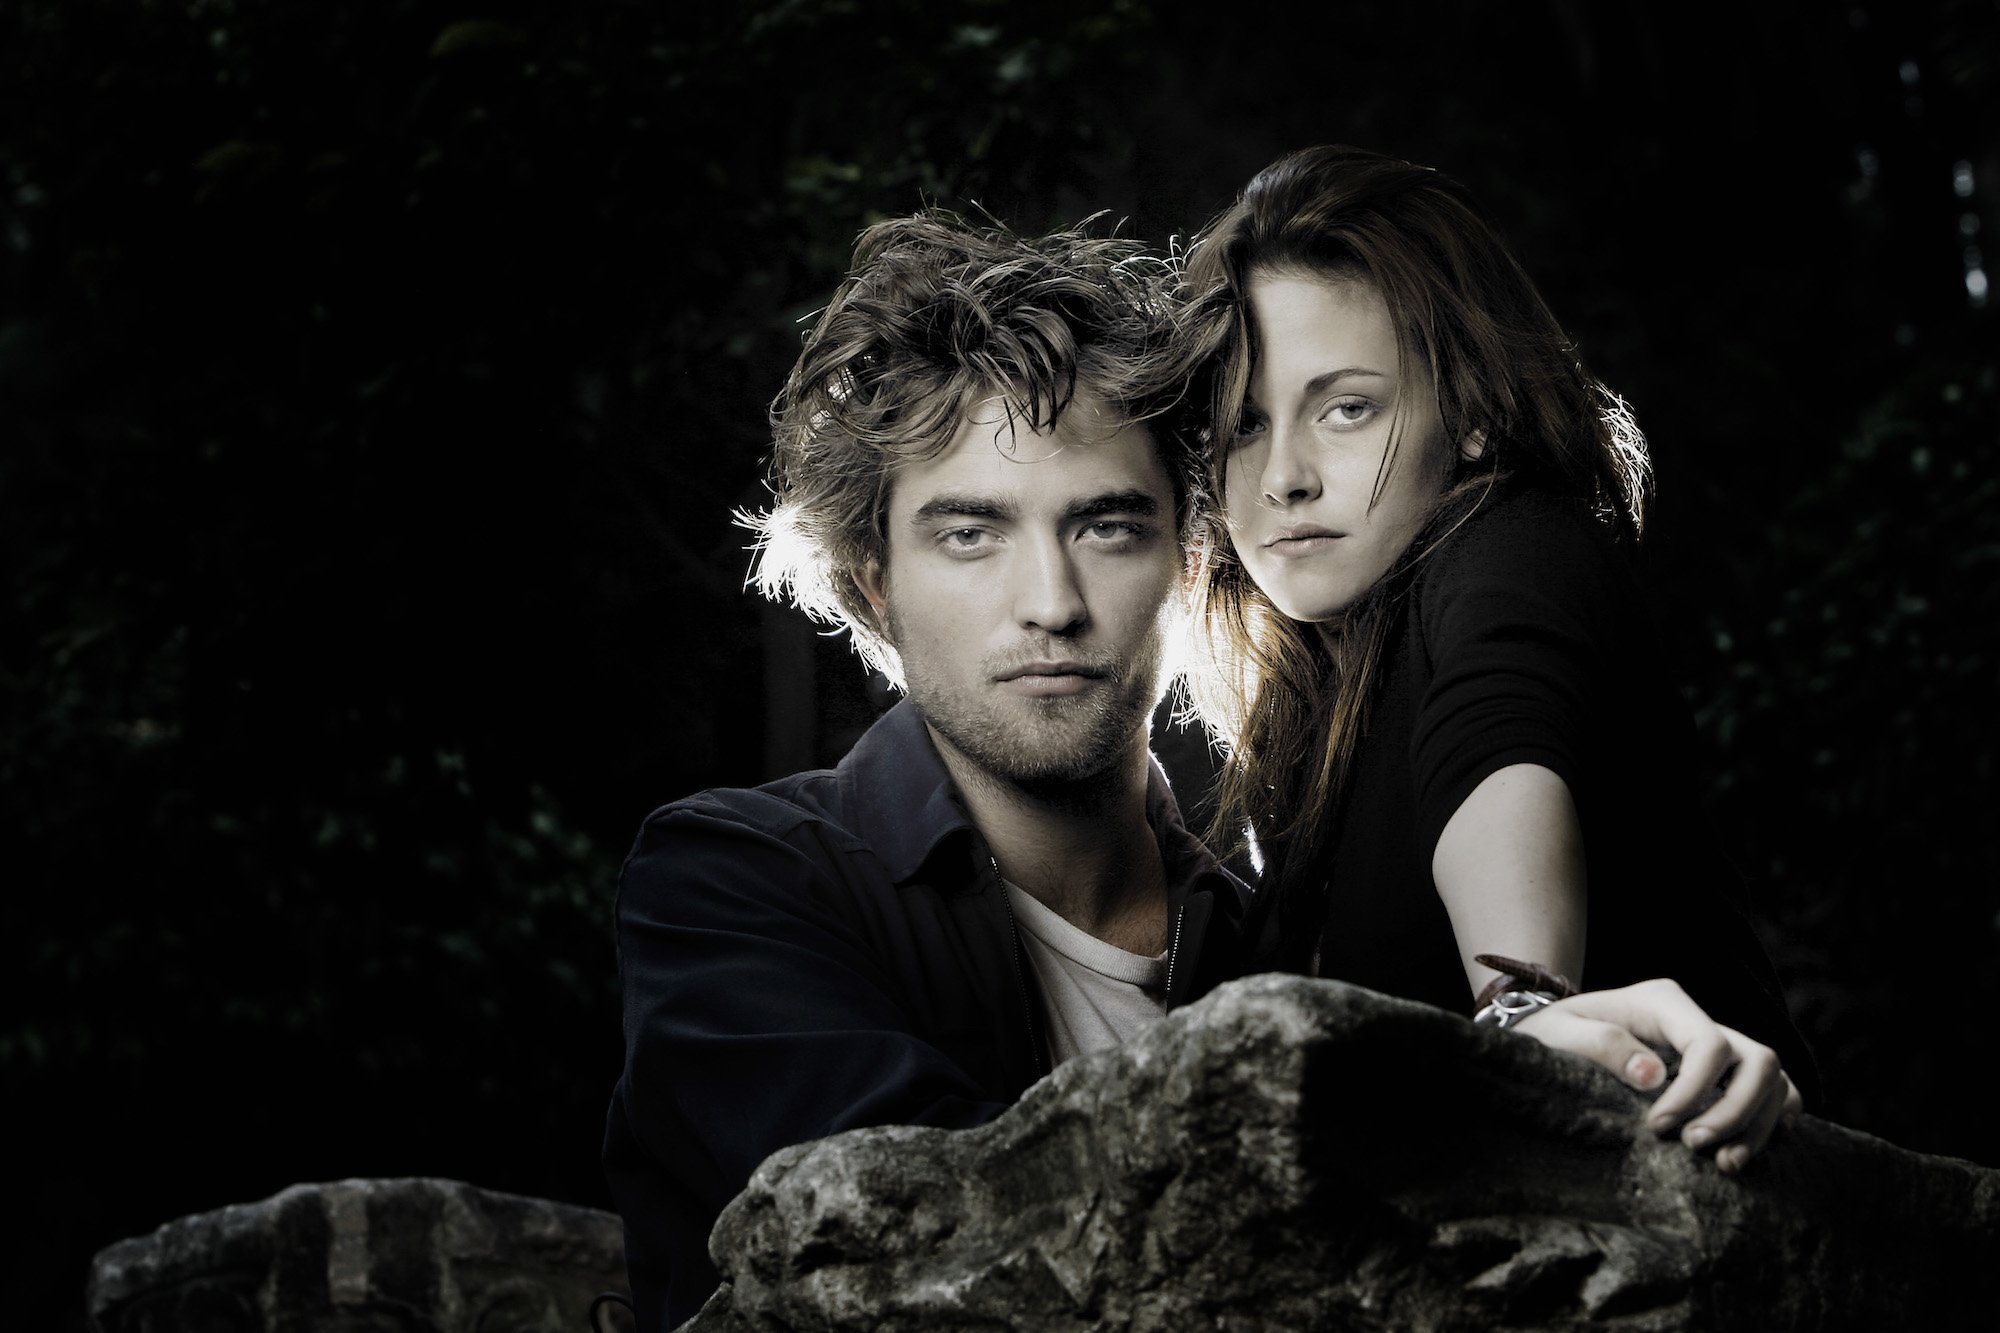 Kristen Stewart and Robert Pattinson pose for the 'Twilight' Portrait Session at the 'De Russie' hotel on Oct. 31, 2008 in Rome, Italy